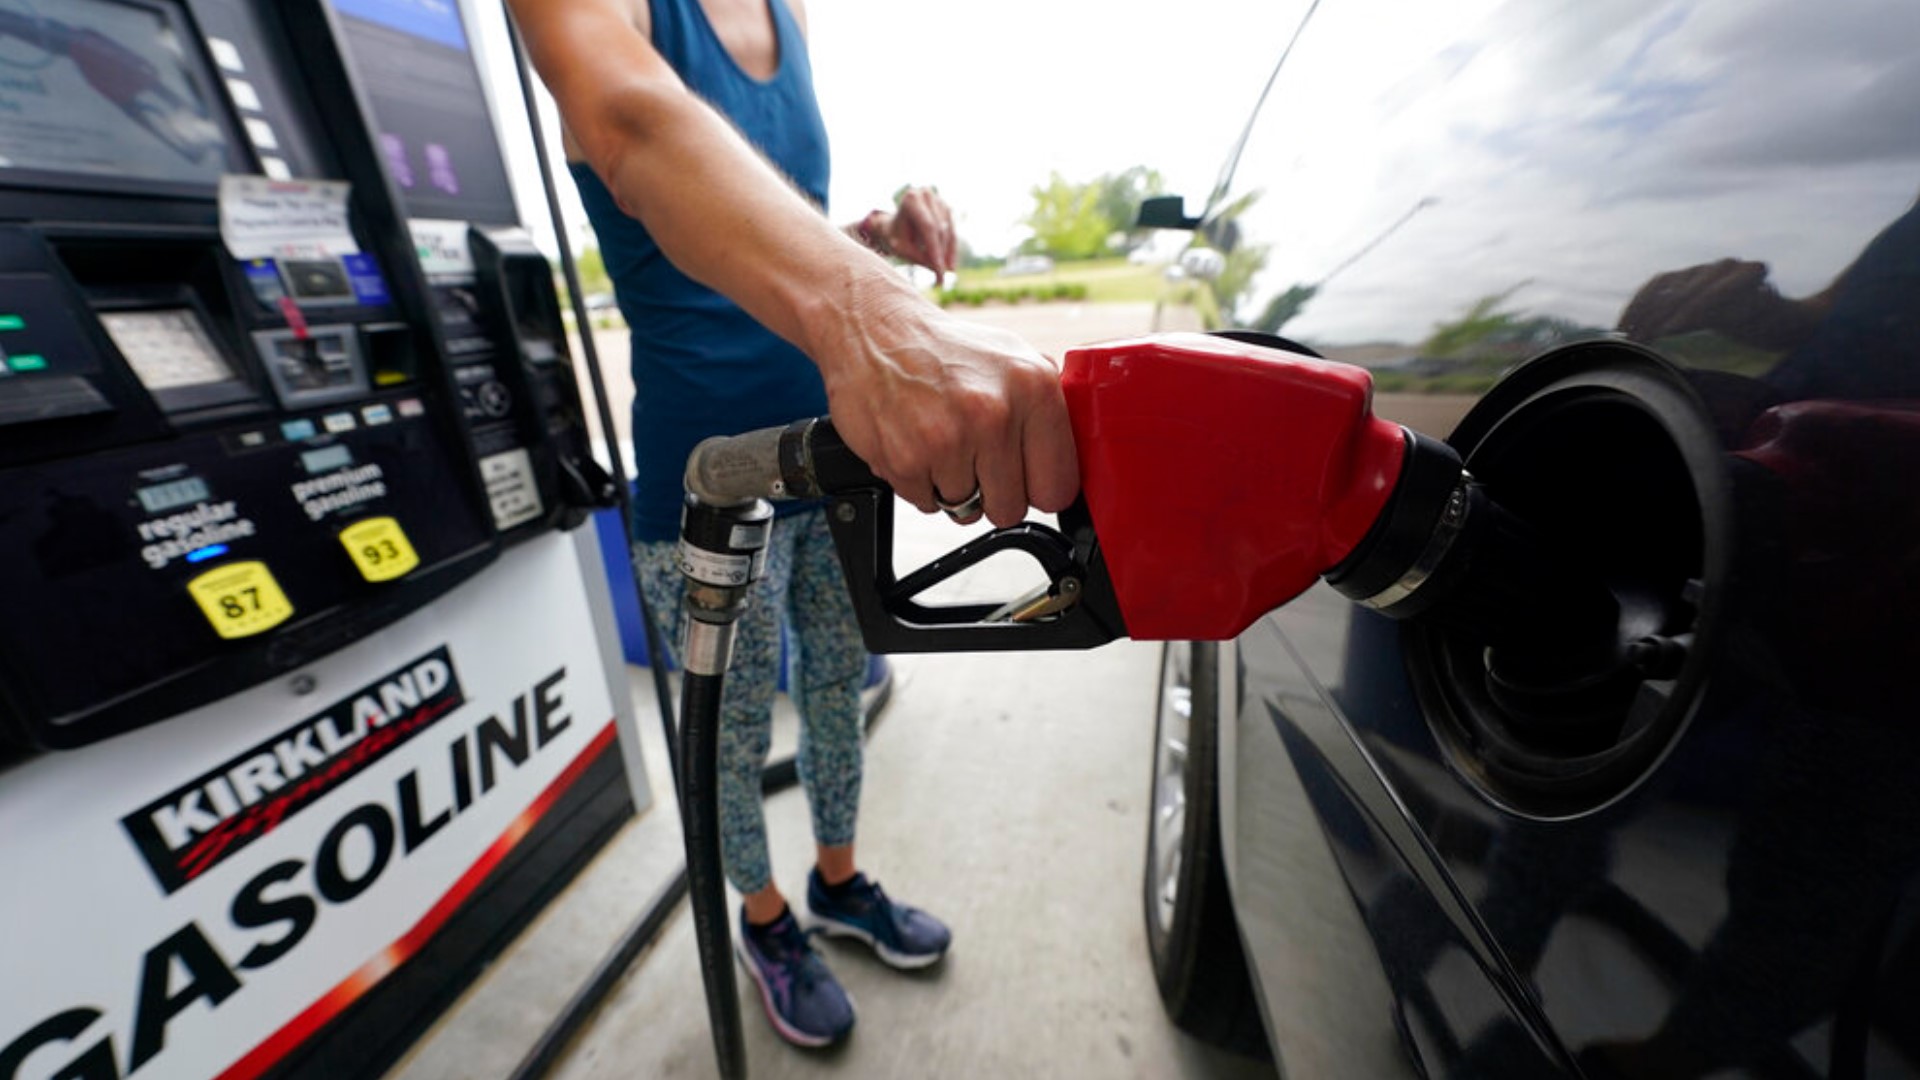 Gas Buddy reports fuel costs have dropped by one and a half cents a gallon from last Monday.